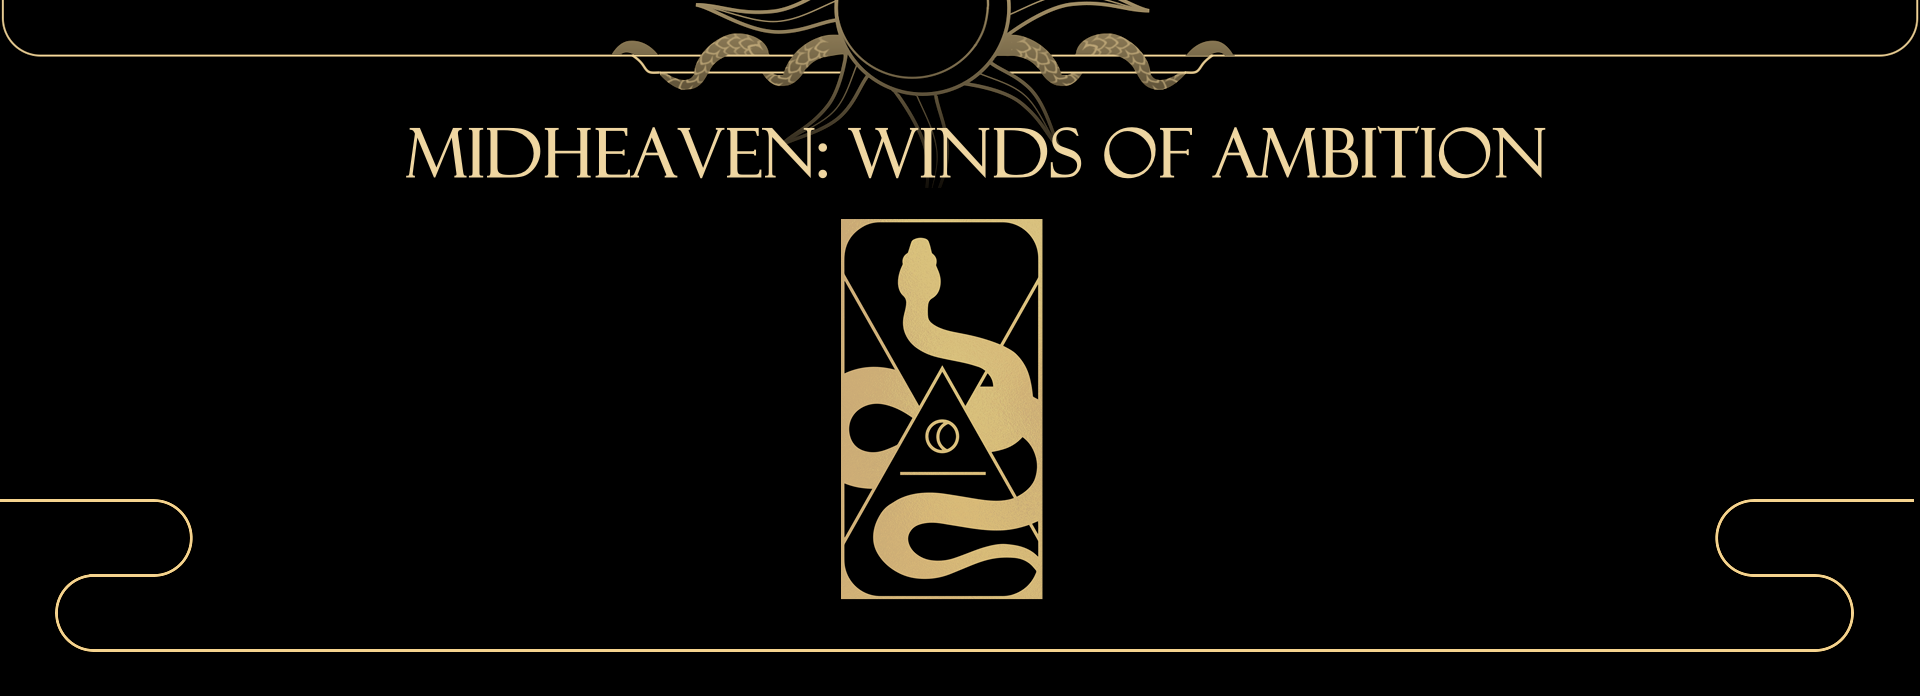 Midheaven: Winds of Ambition